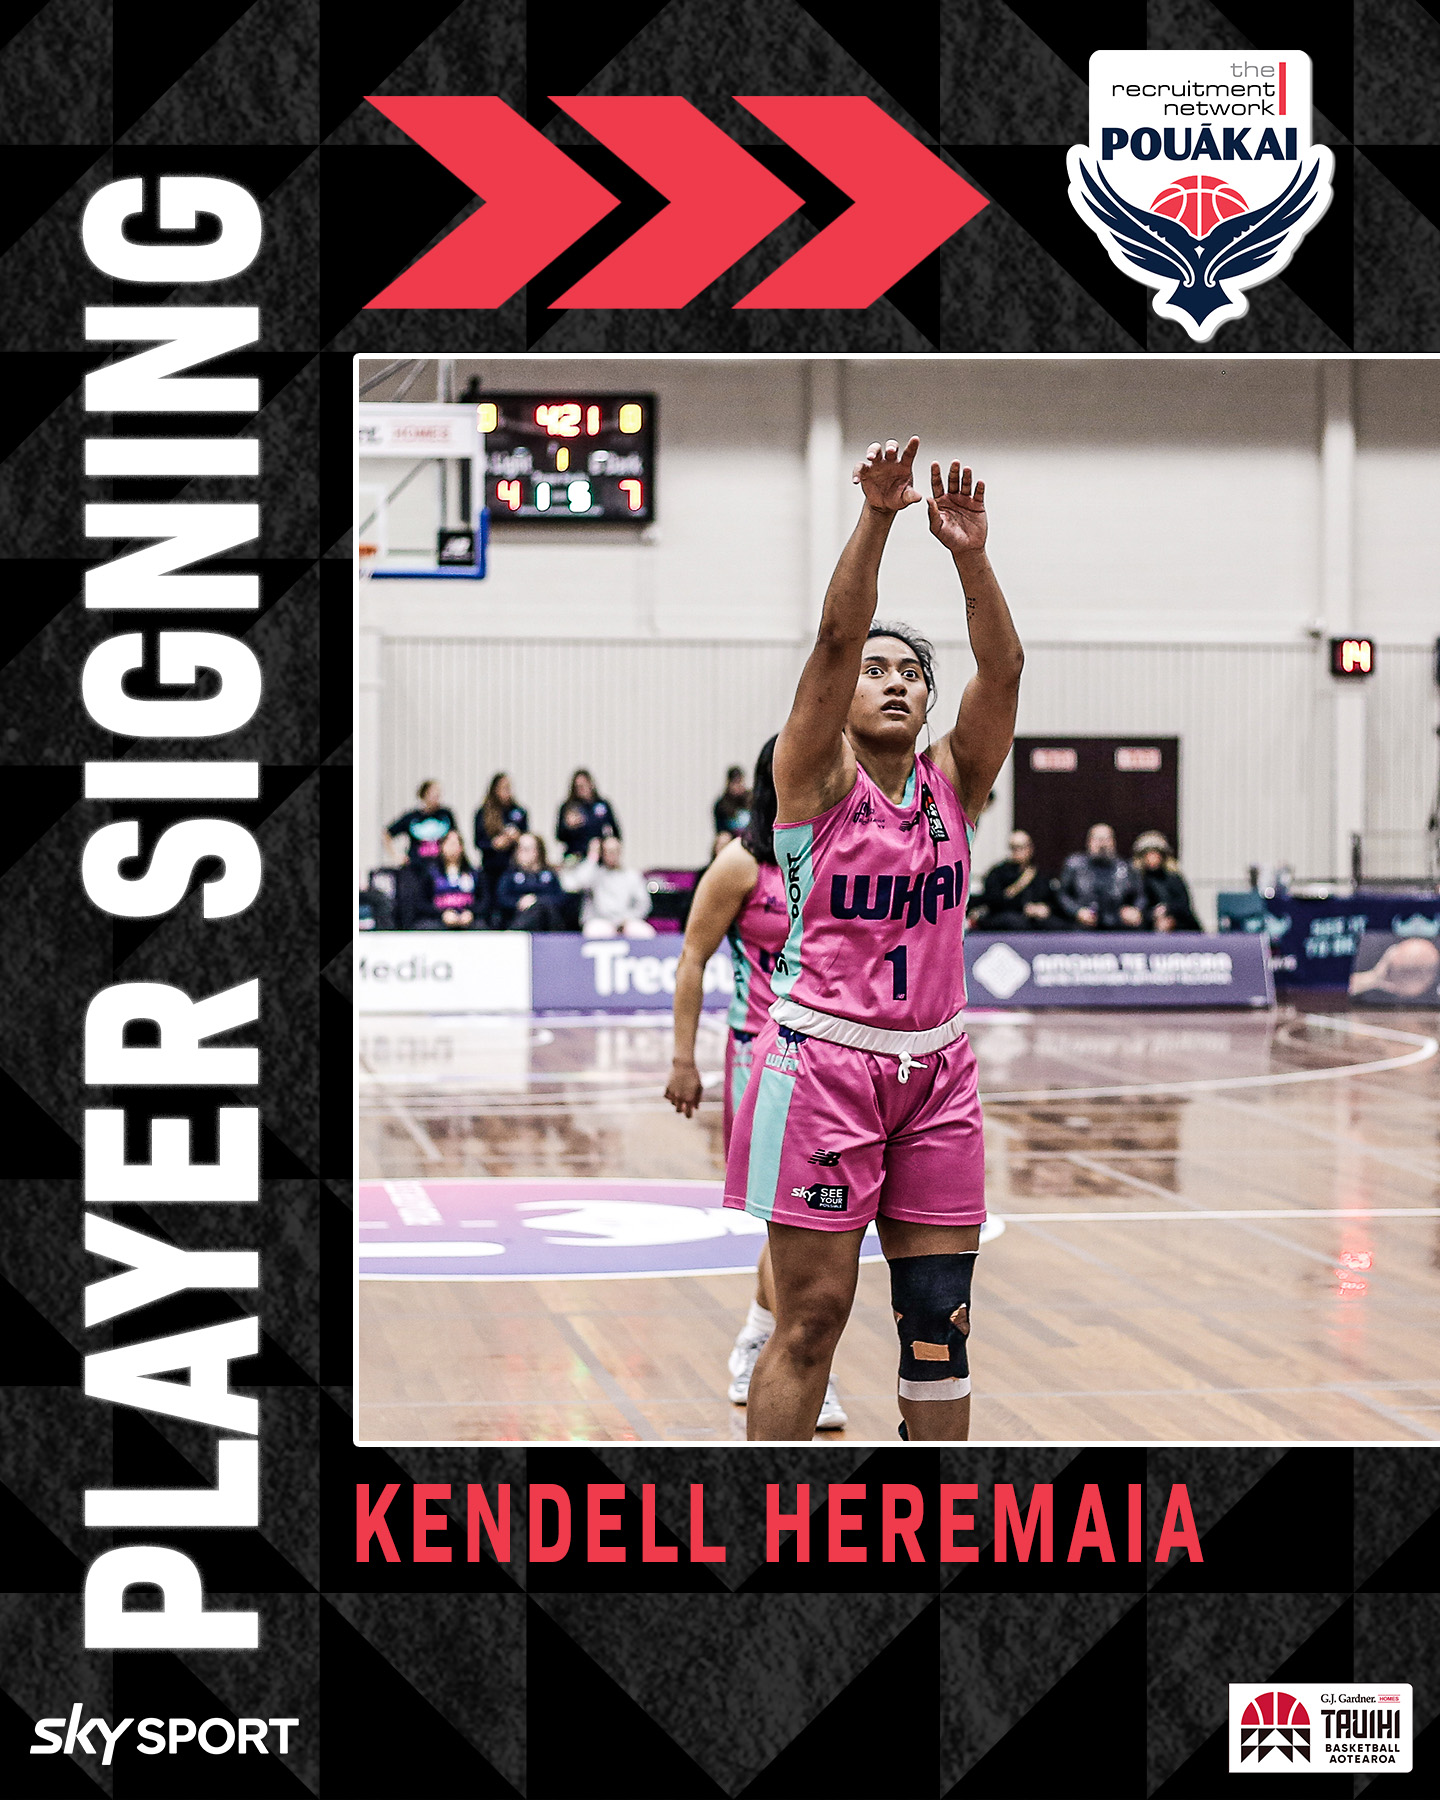 Kendell Heremaia